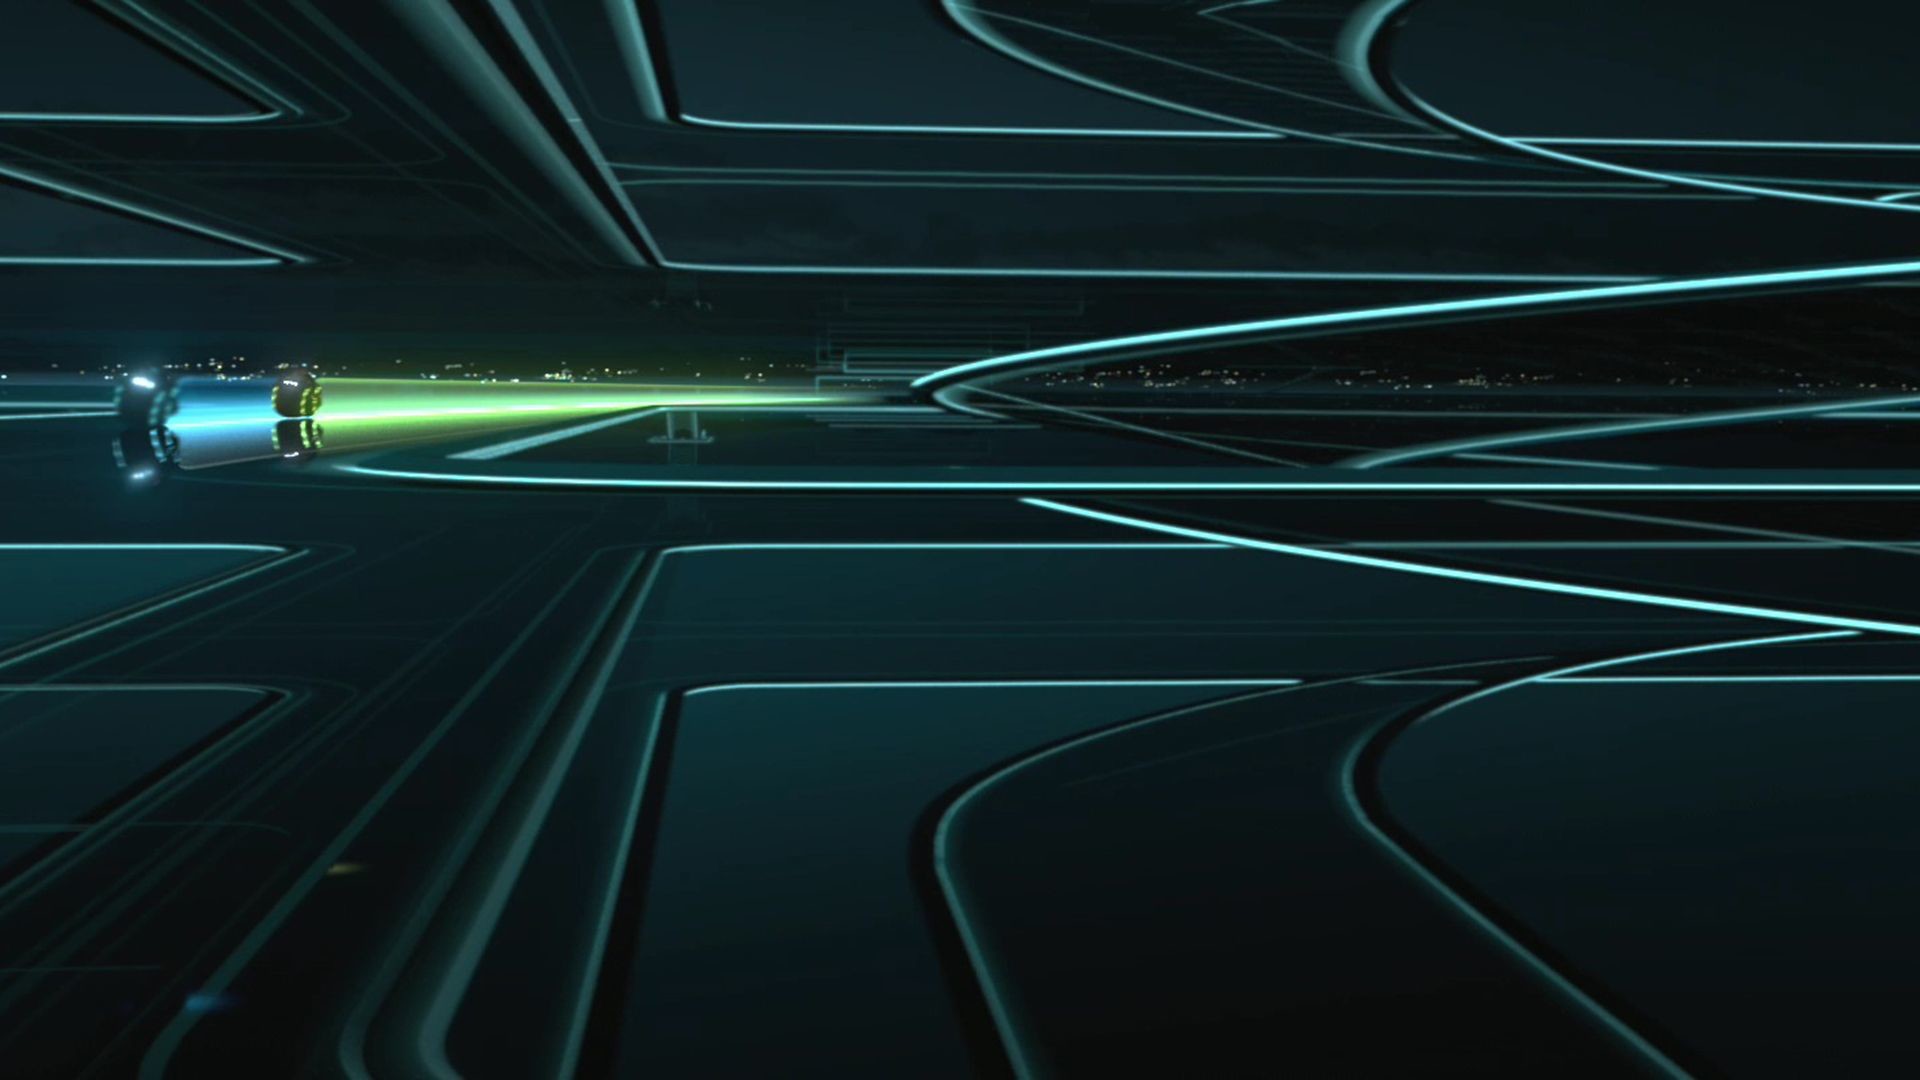 Tron Legacy Backgrounds.